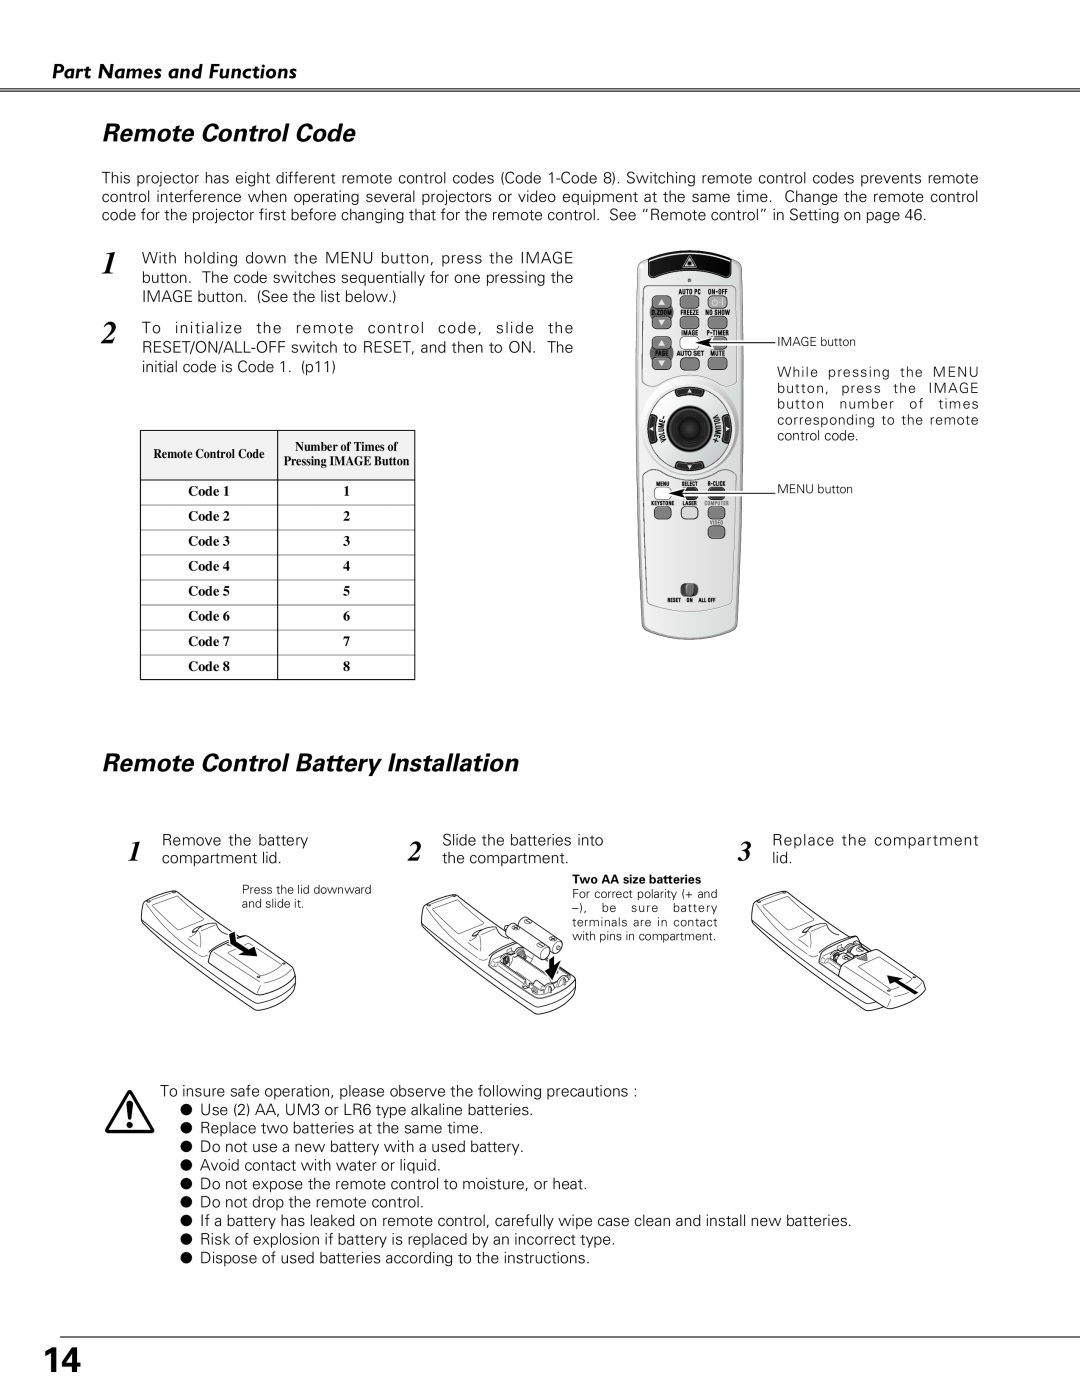 Eiki LC-XB26 Remote Control Code, Remote Control Battery Installation, Part Names and Functions, To initialize the 